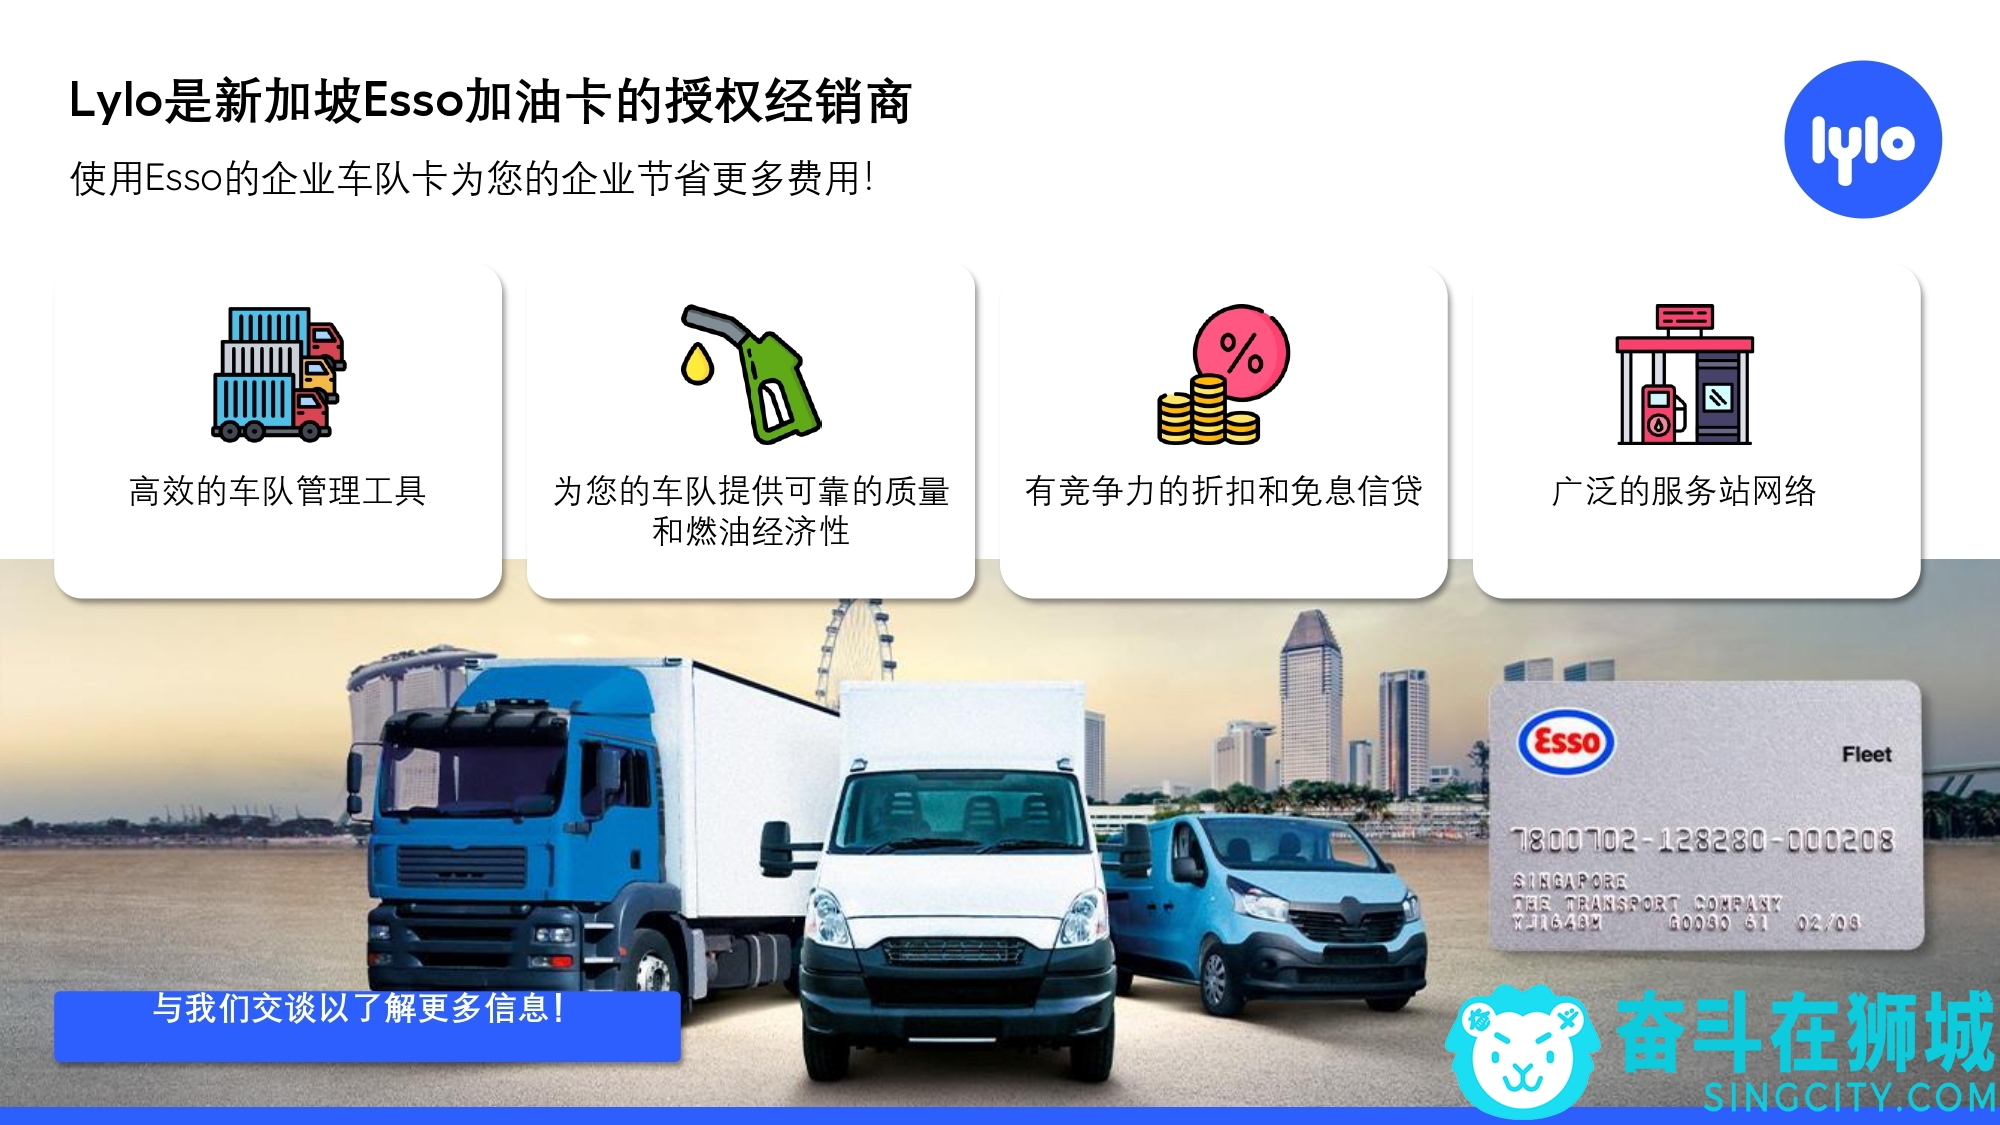 Lylo Introductory Deck v1.2 Chinese version_page-0011.jpg